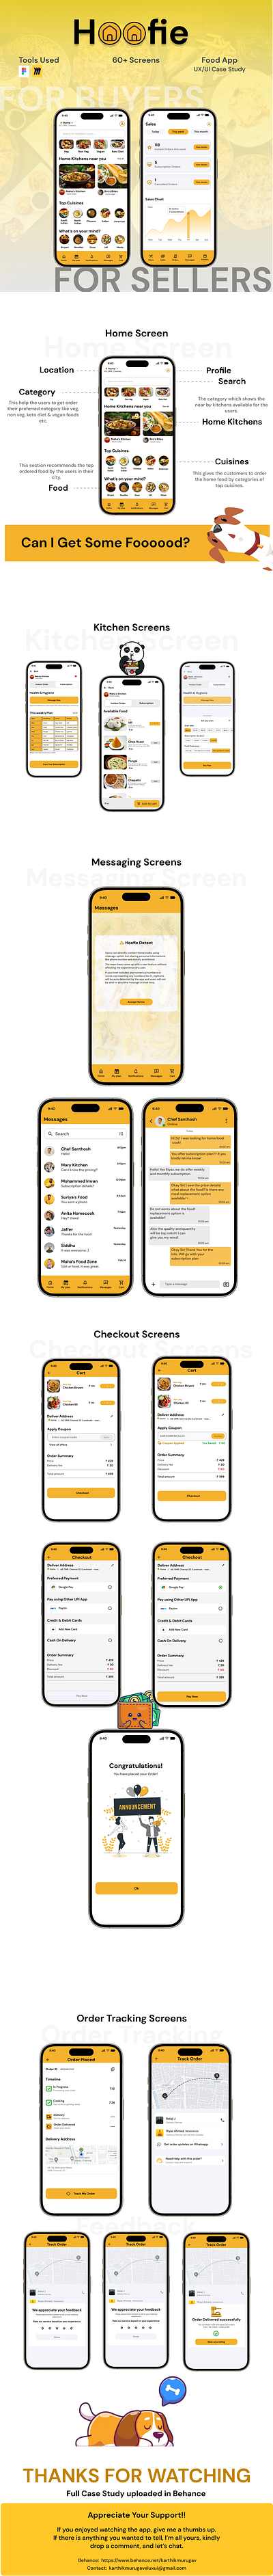 Hoofie - Home Food Mobile App | UX UI Case Study case study color theory food buying app food selling app home food app home food app design login page mobile app mobile app case study mobile app design typography ui ui design ui ux ui ux case study user interface user research